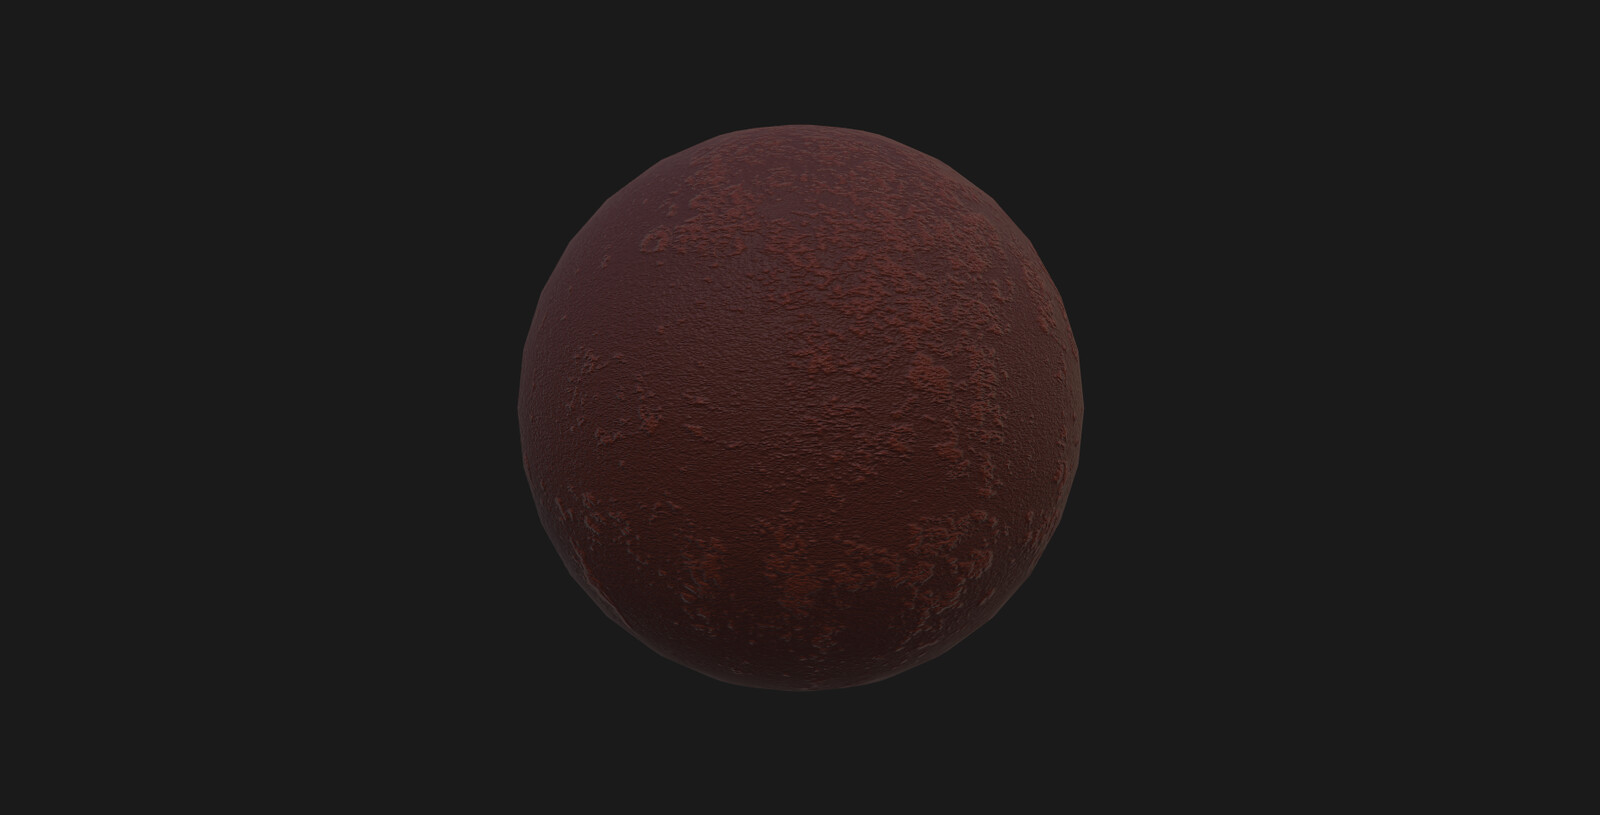 Renderd with shadermap